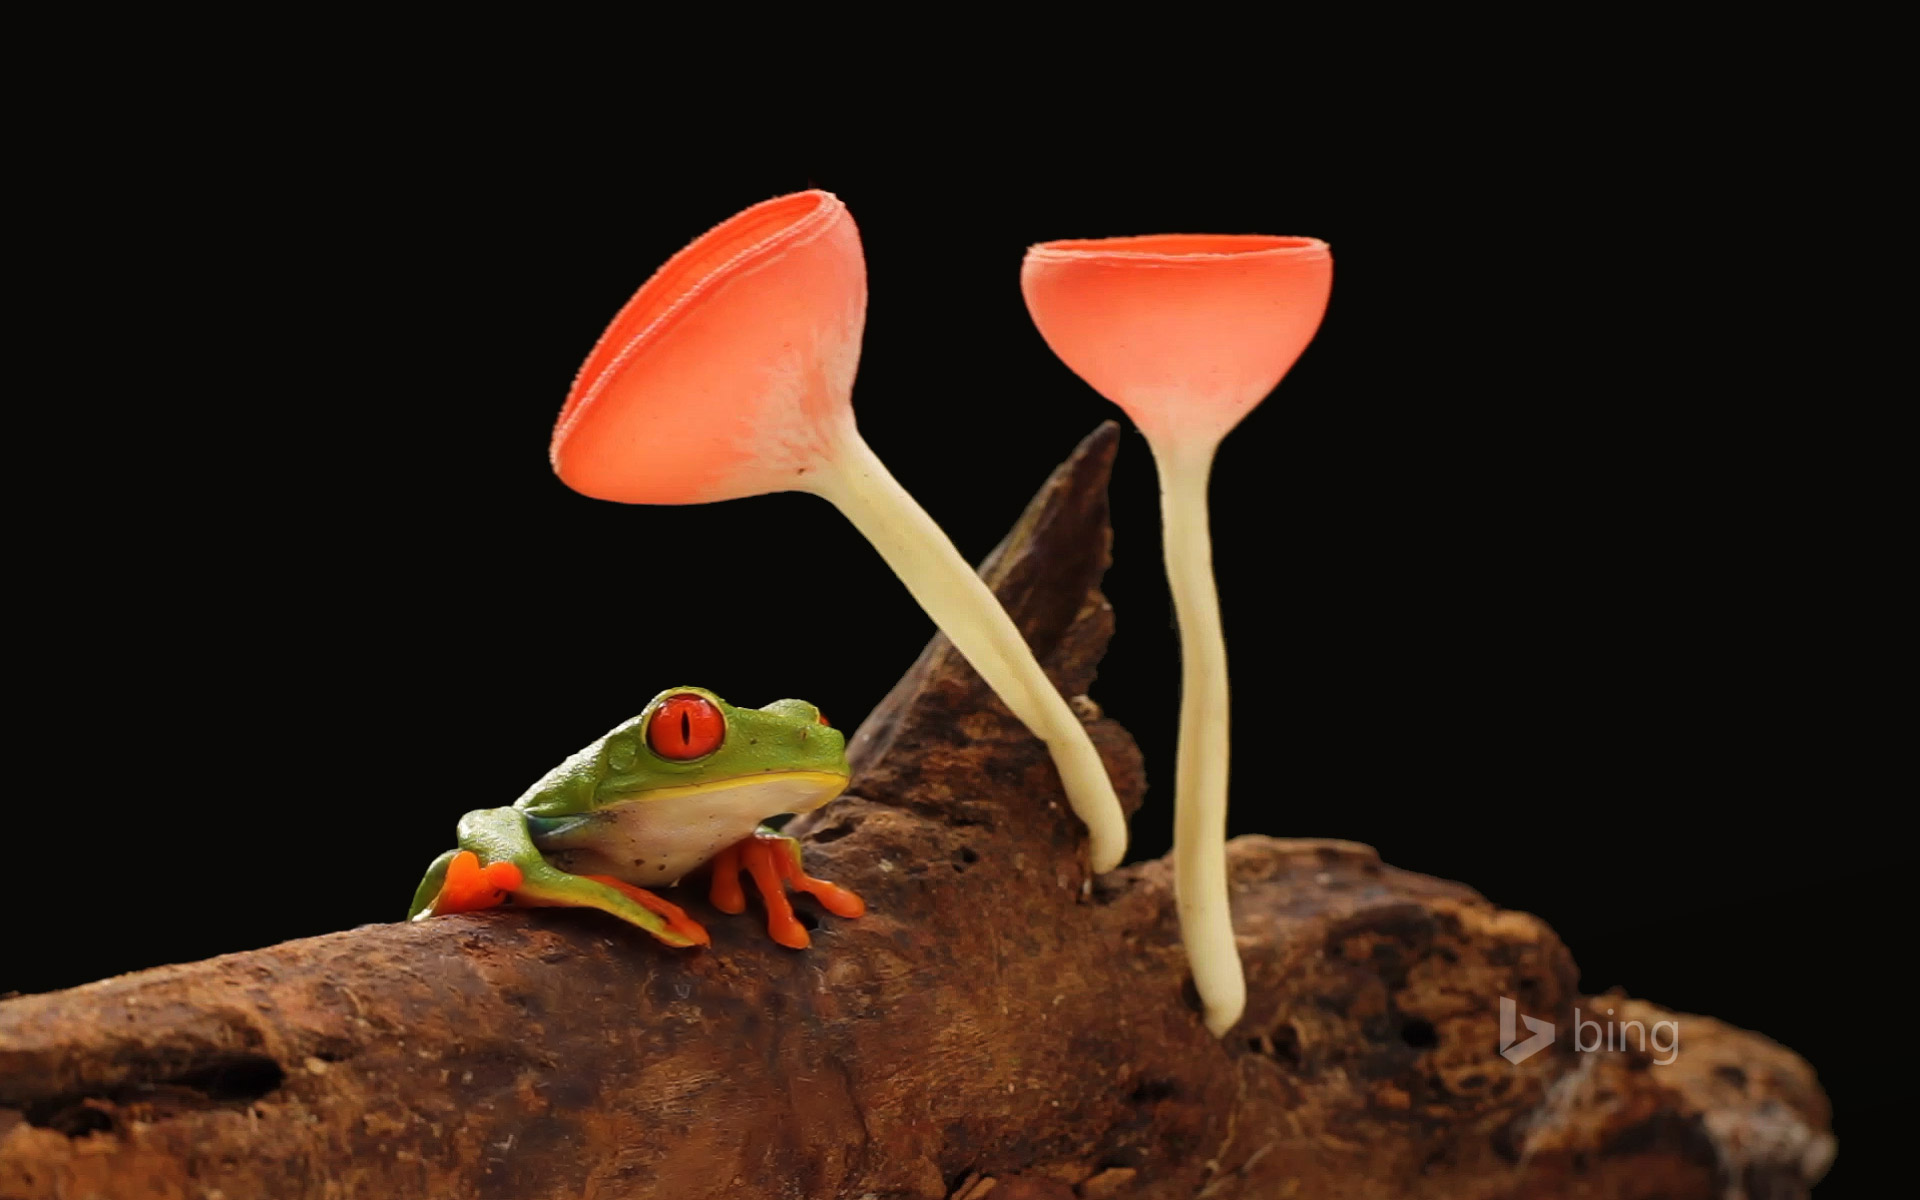 Red Eyed Or Gaudy Leaf Frog With Mushrooms New Bing